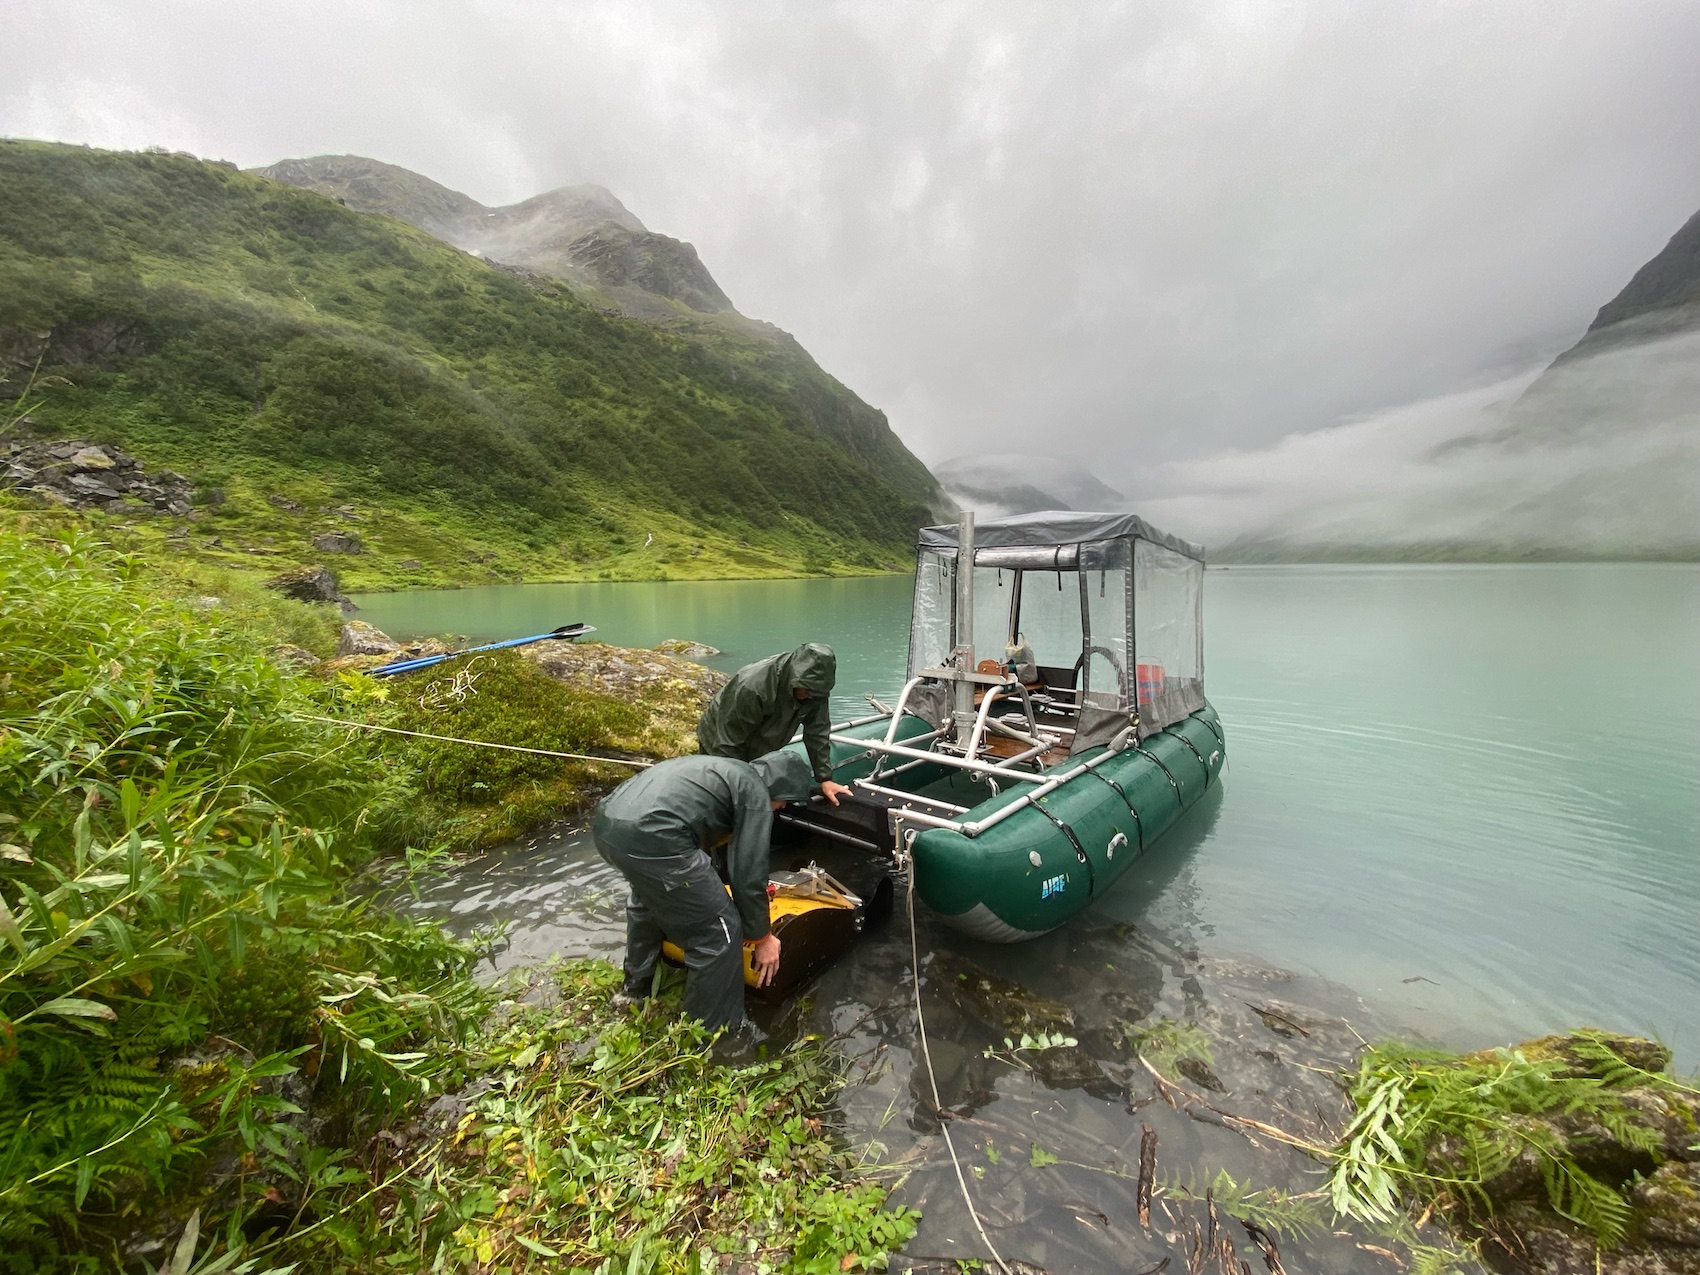 Two people work next to a pontoon boat floating on a lake surrounded by green alpine tundra and mountains obscured in foggy clouds.